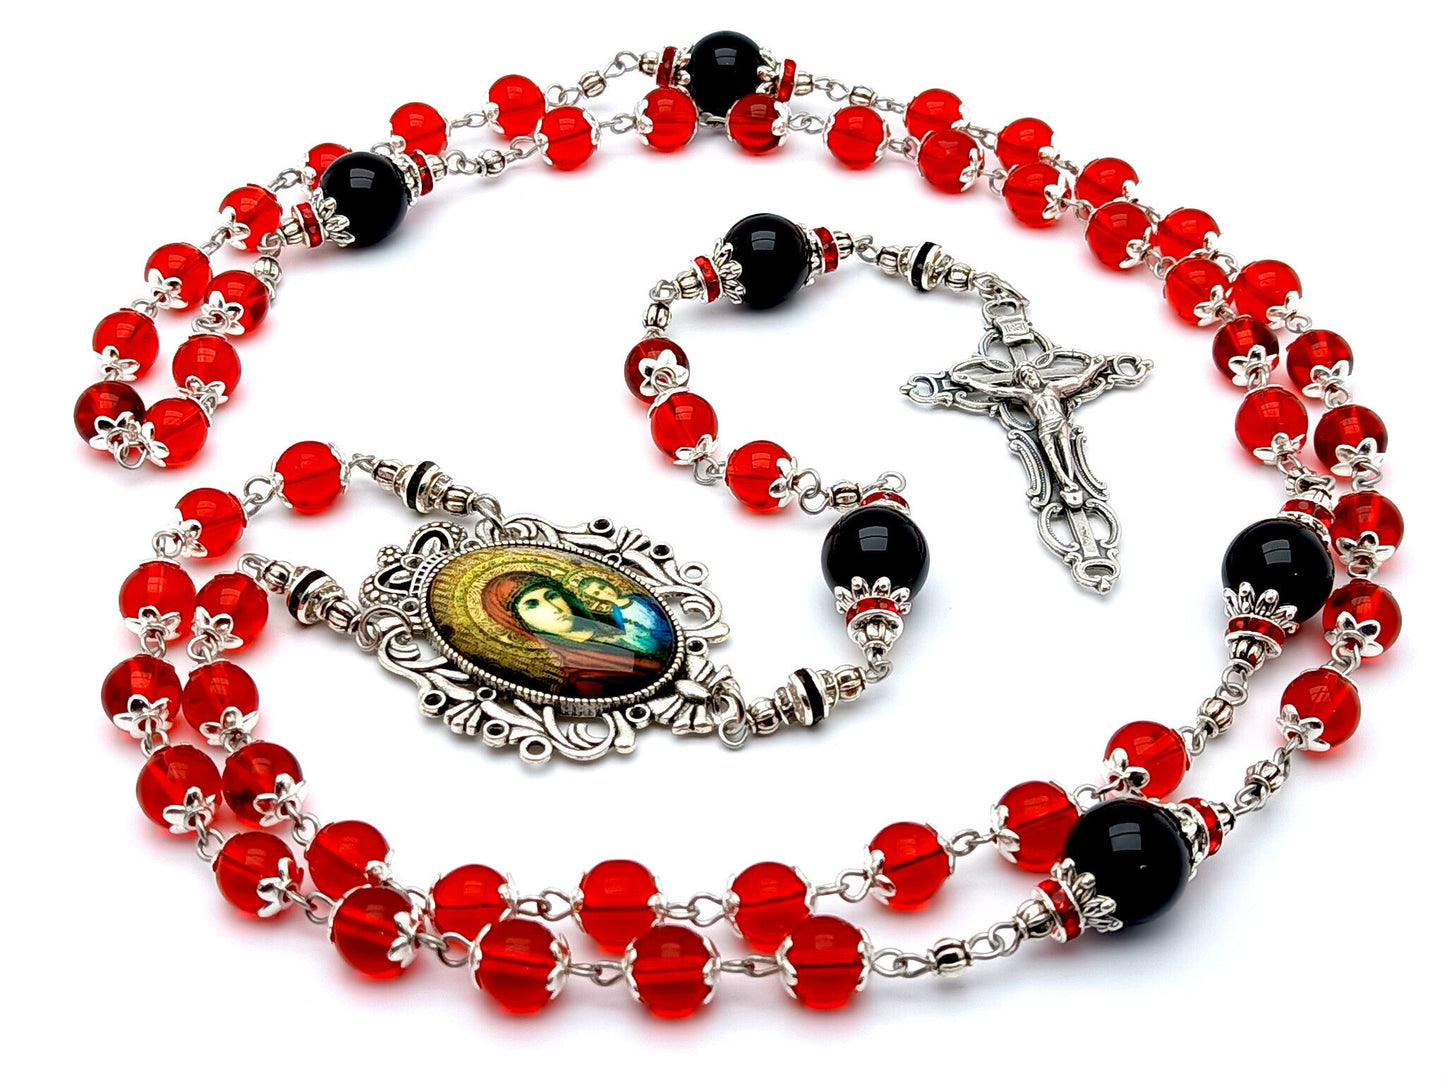 Our Lady of Perpetual Help unique rosary beads with red glass and onyx gemstone beads, silver filigree crucifix and picture centre medal.